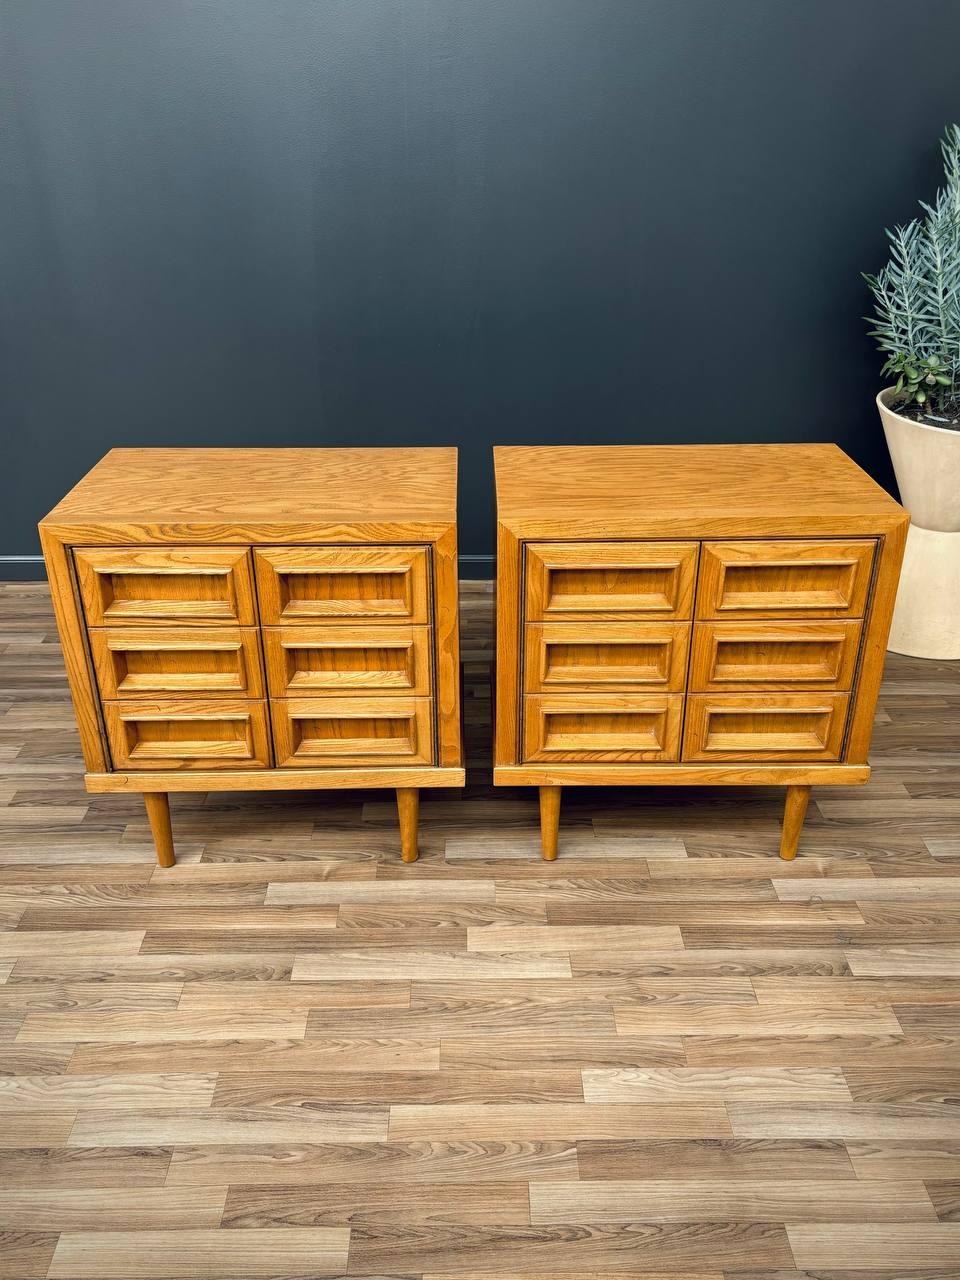 American Mid-Century Modern “Campatica” Brutalist Night Stands by Drexel